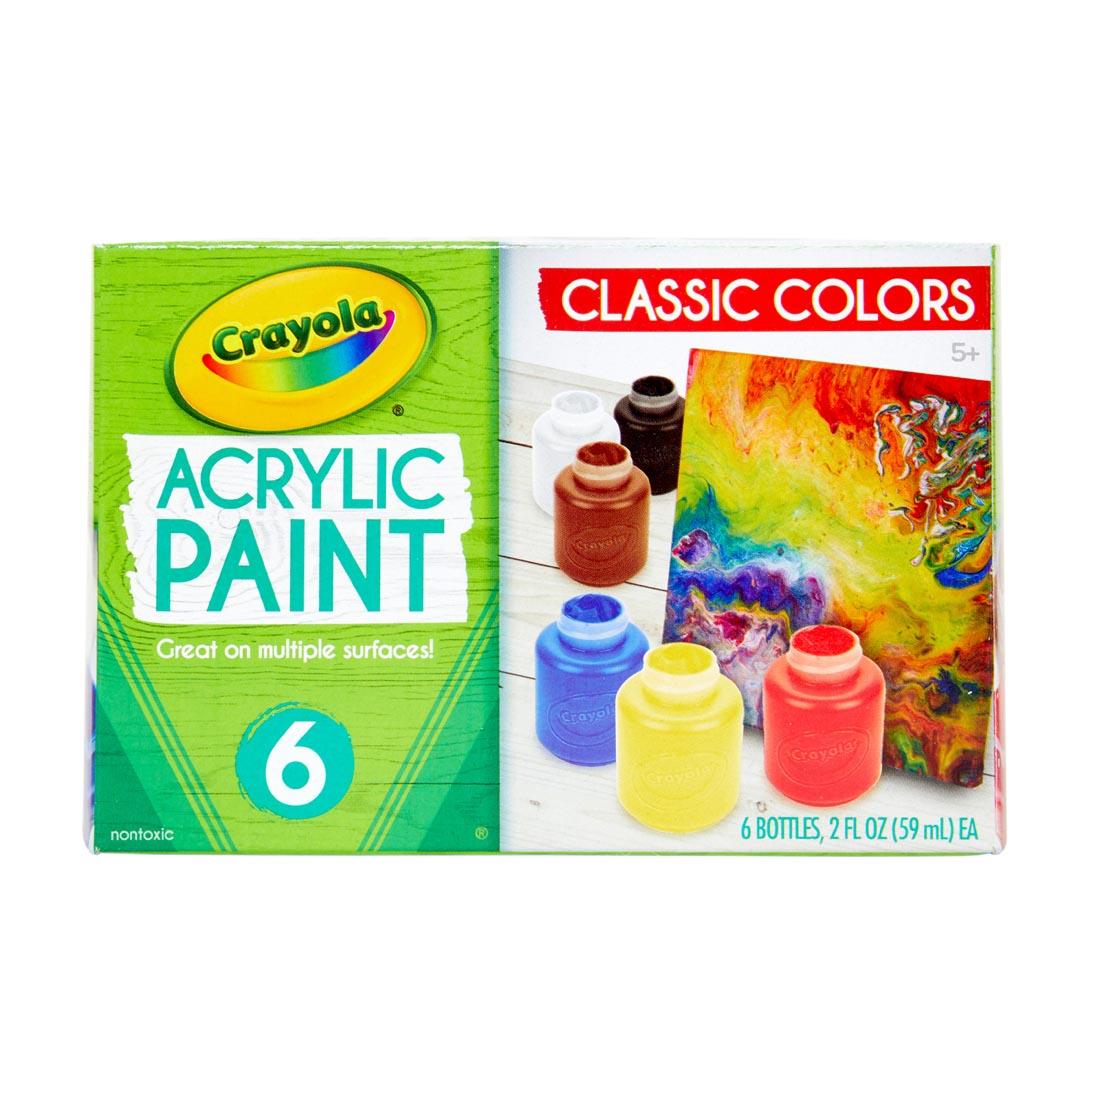 Box of Crayola Acrylic Paint Set with 6 Classic Colors